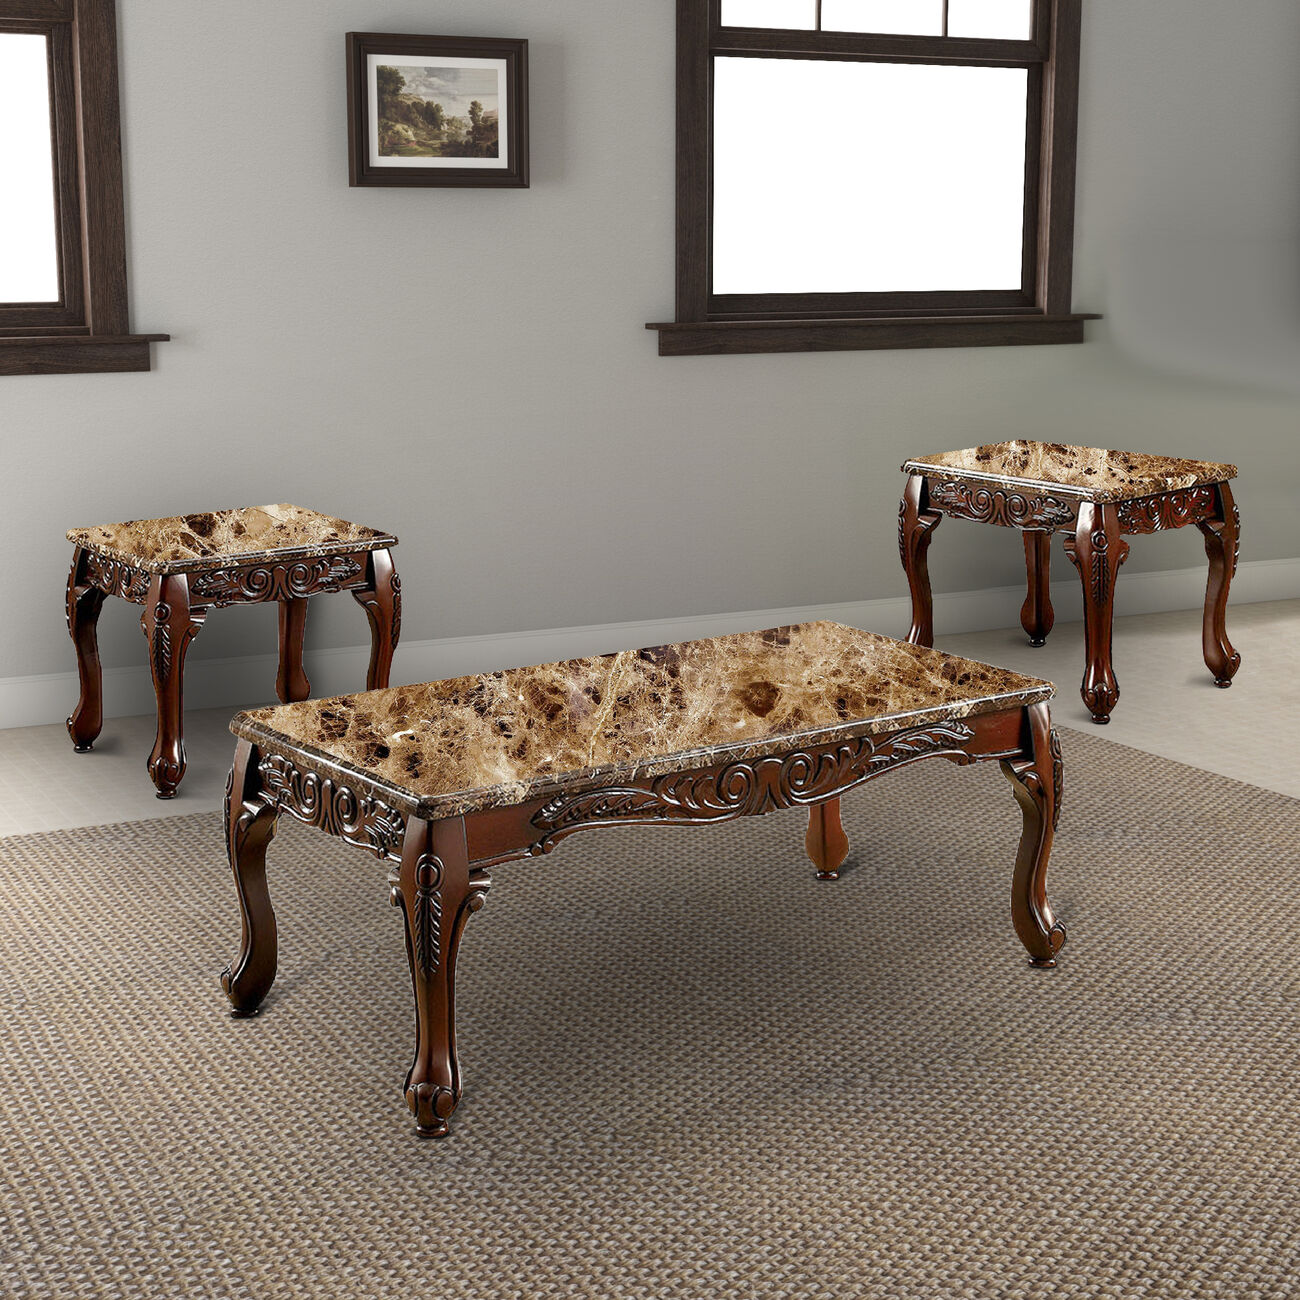 3 PIECE TABLE SET With Marble Table Top, Dark Oak Brown